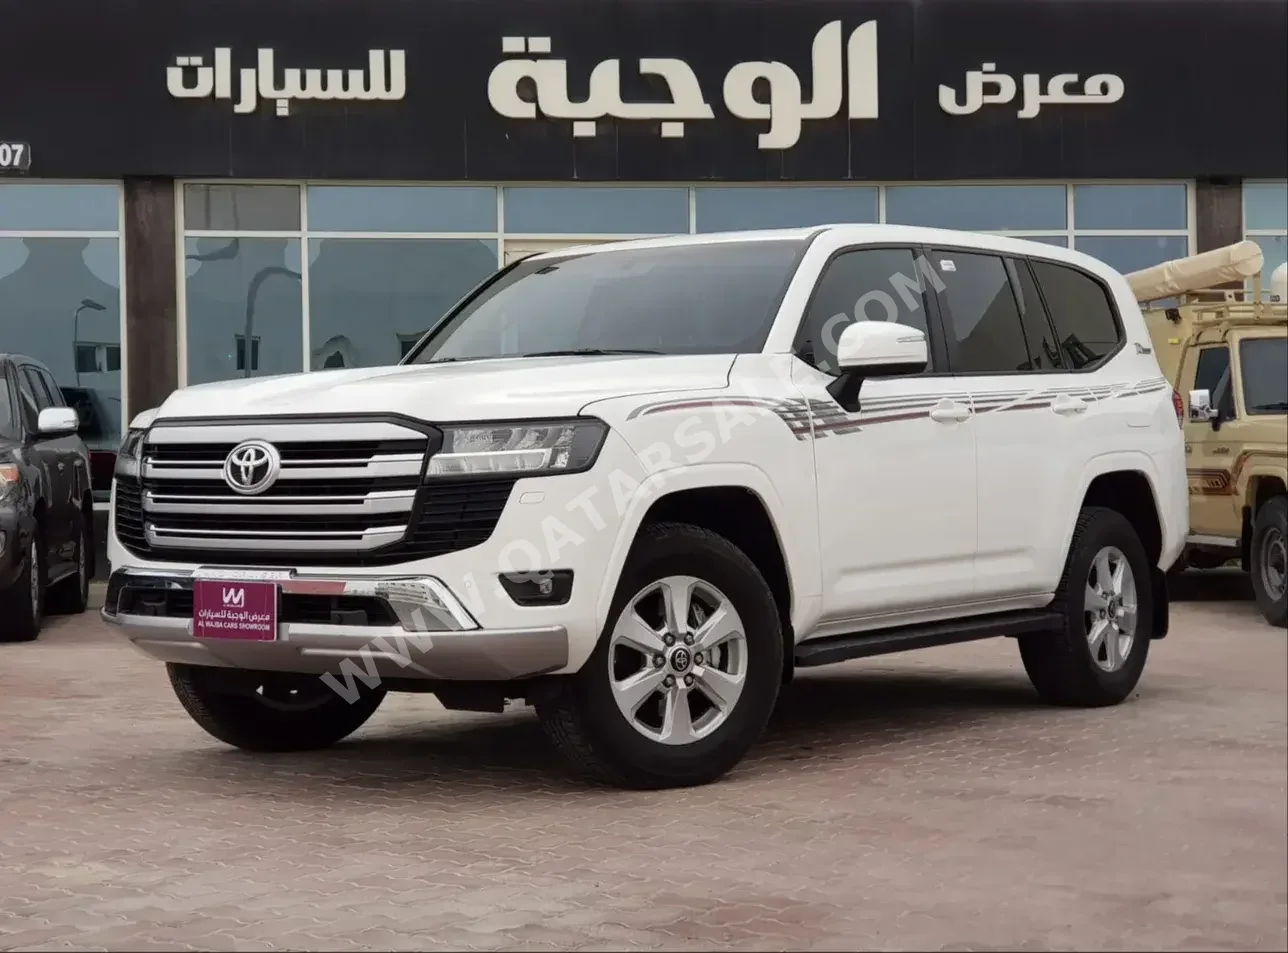 Toyota  Land Cruiser  GXR Twin Turbo  2022  Automatic  20,000 Km  6 Cylinder  Four Wheel Drive (4WD)  SUV  White  With Warranty